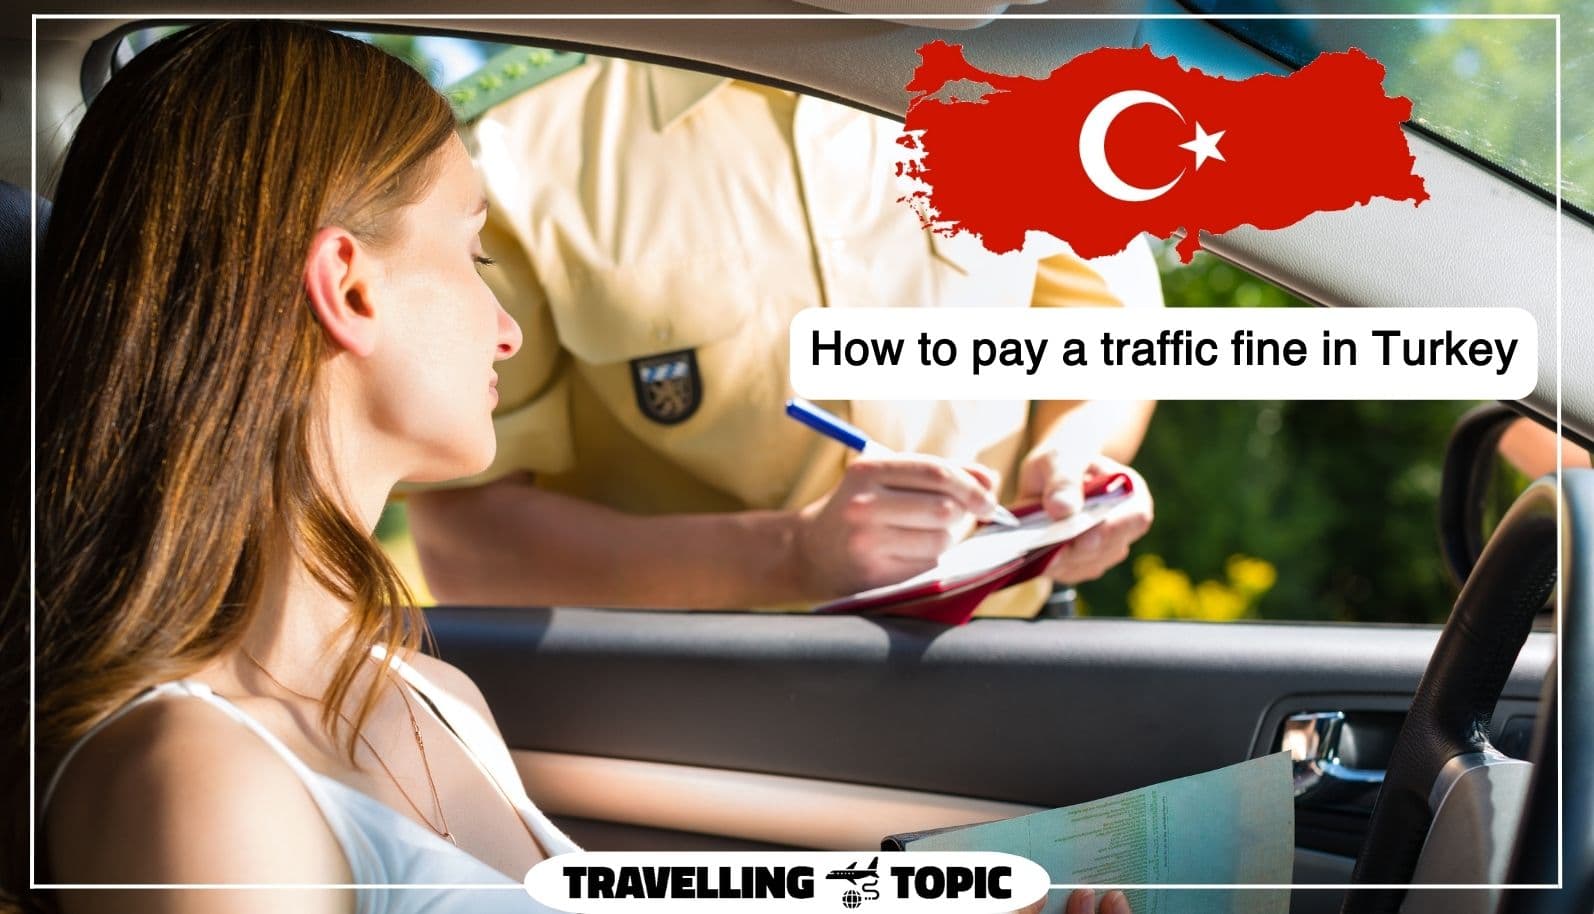 How to pay a traffic fine in Turkey